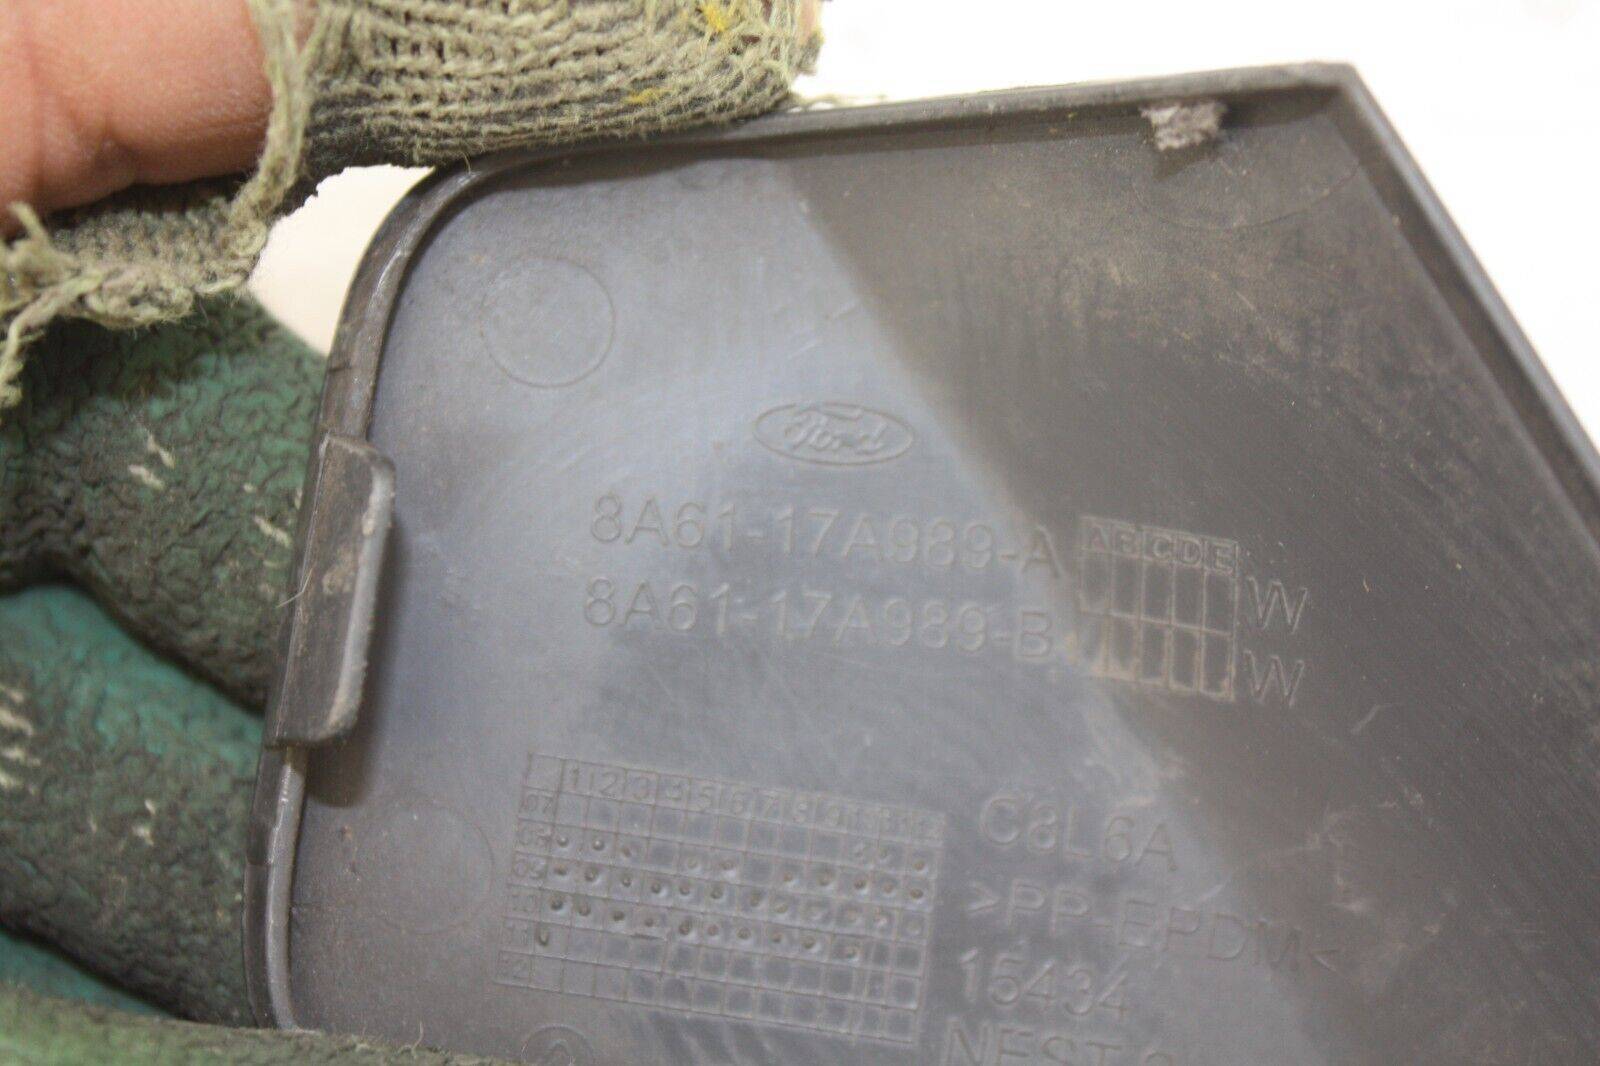 Ford-Fiesta-Front-Bumper-Tow-Cover-8A61-17A989-A-Genuine-176423557906-6